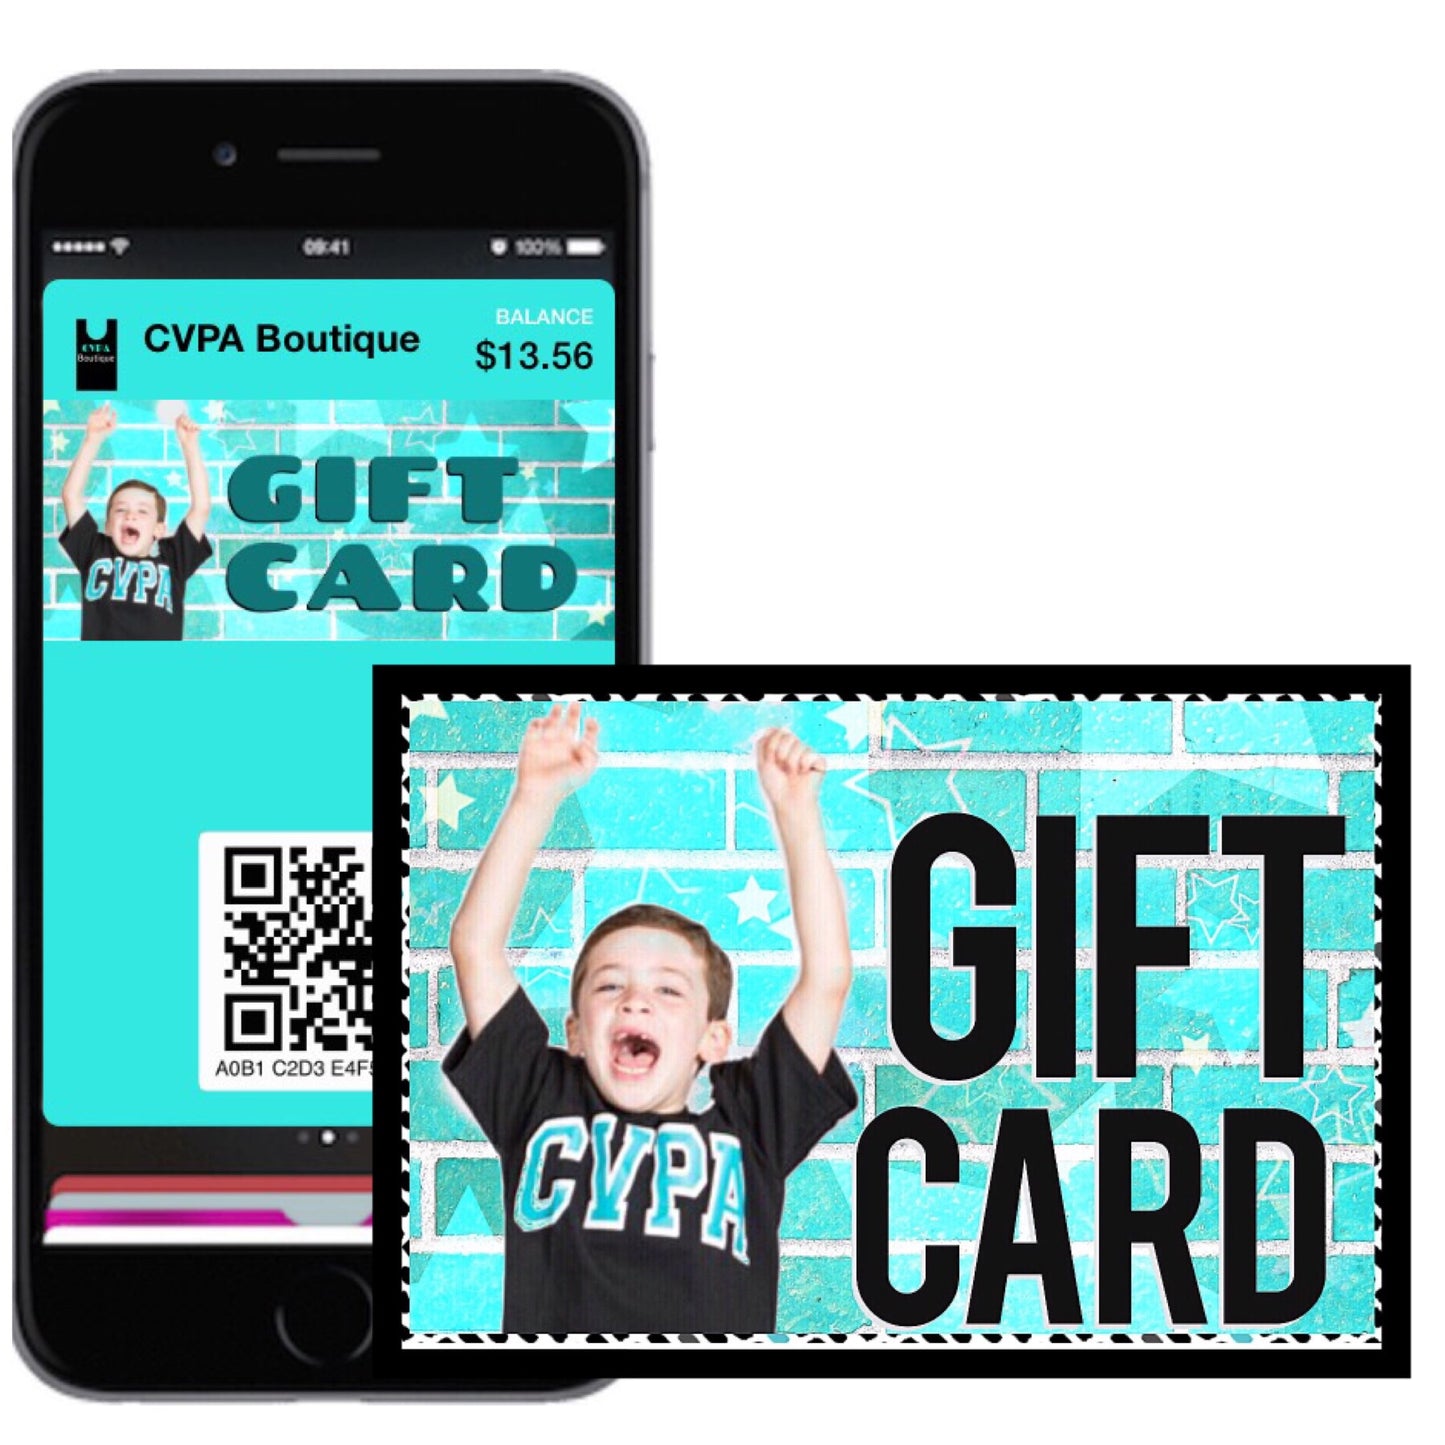 CVPA Boutique Gift Card